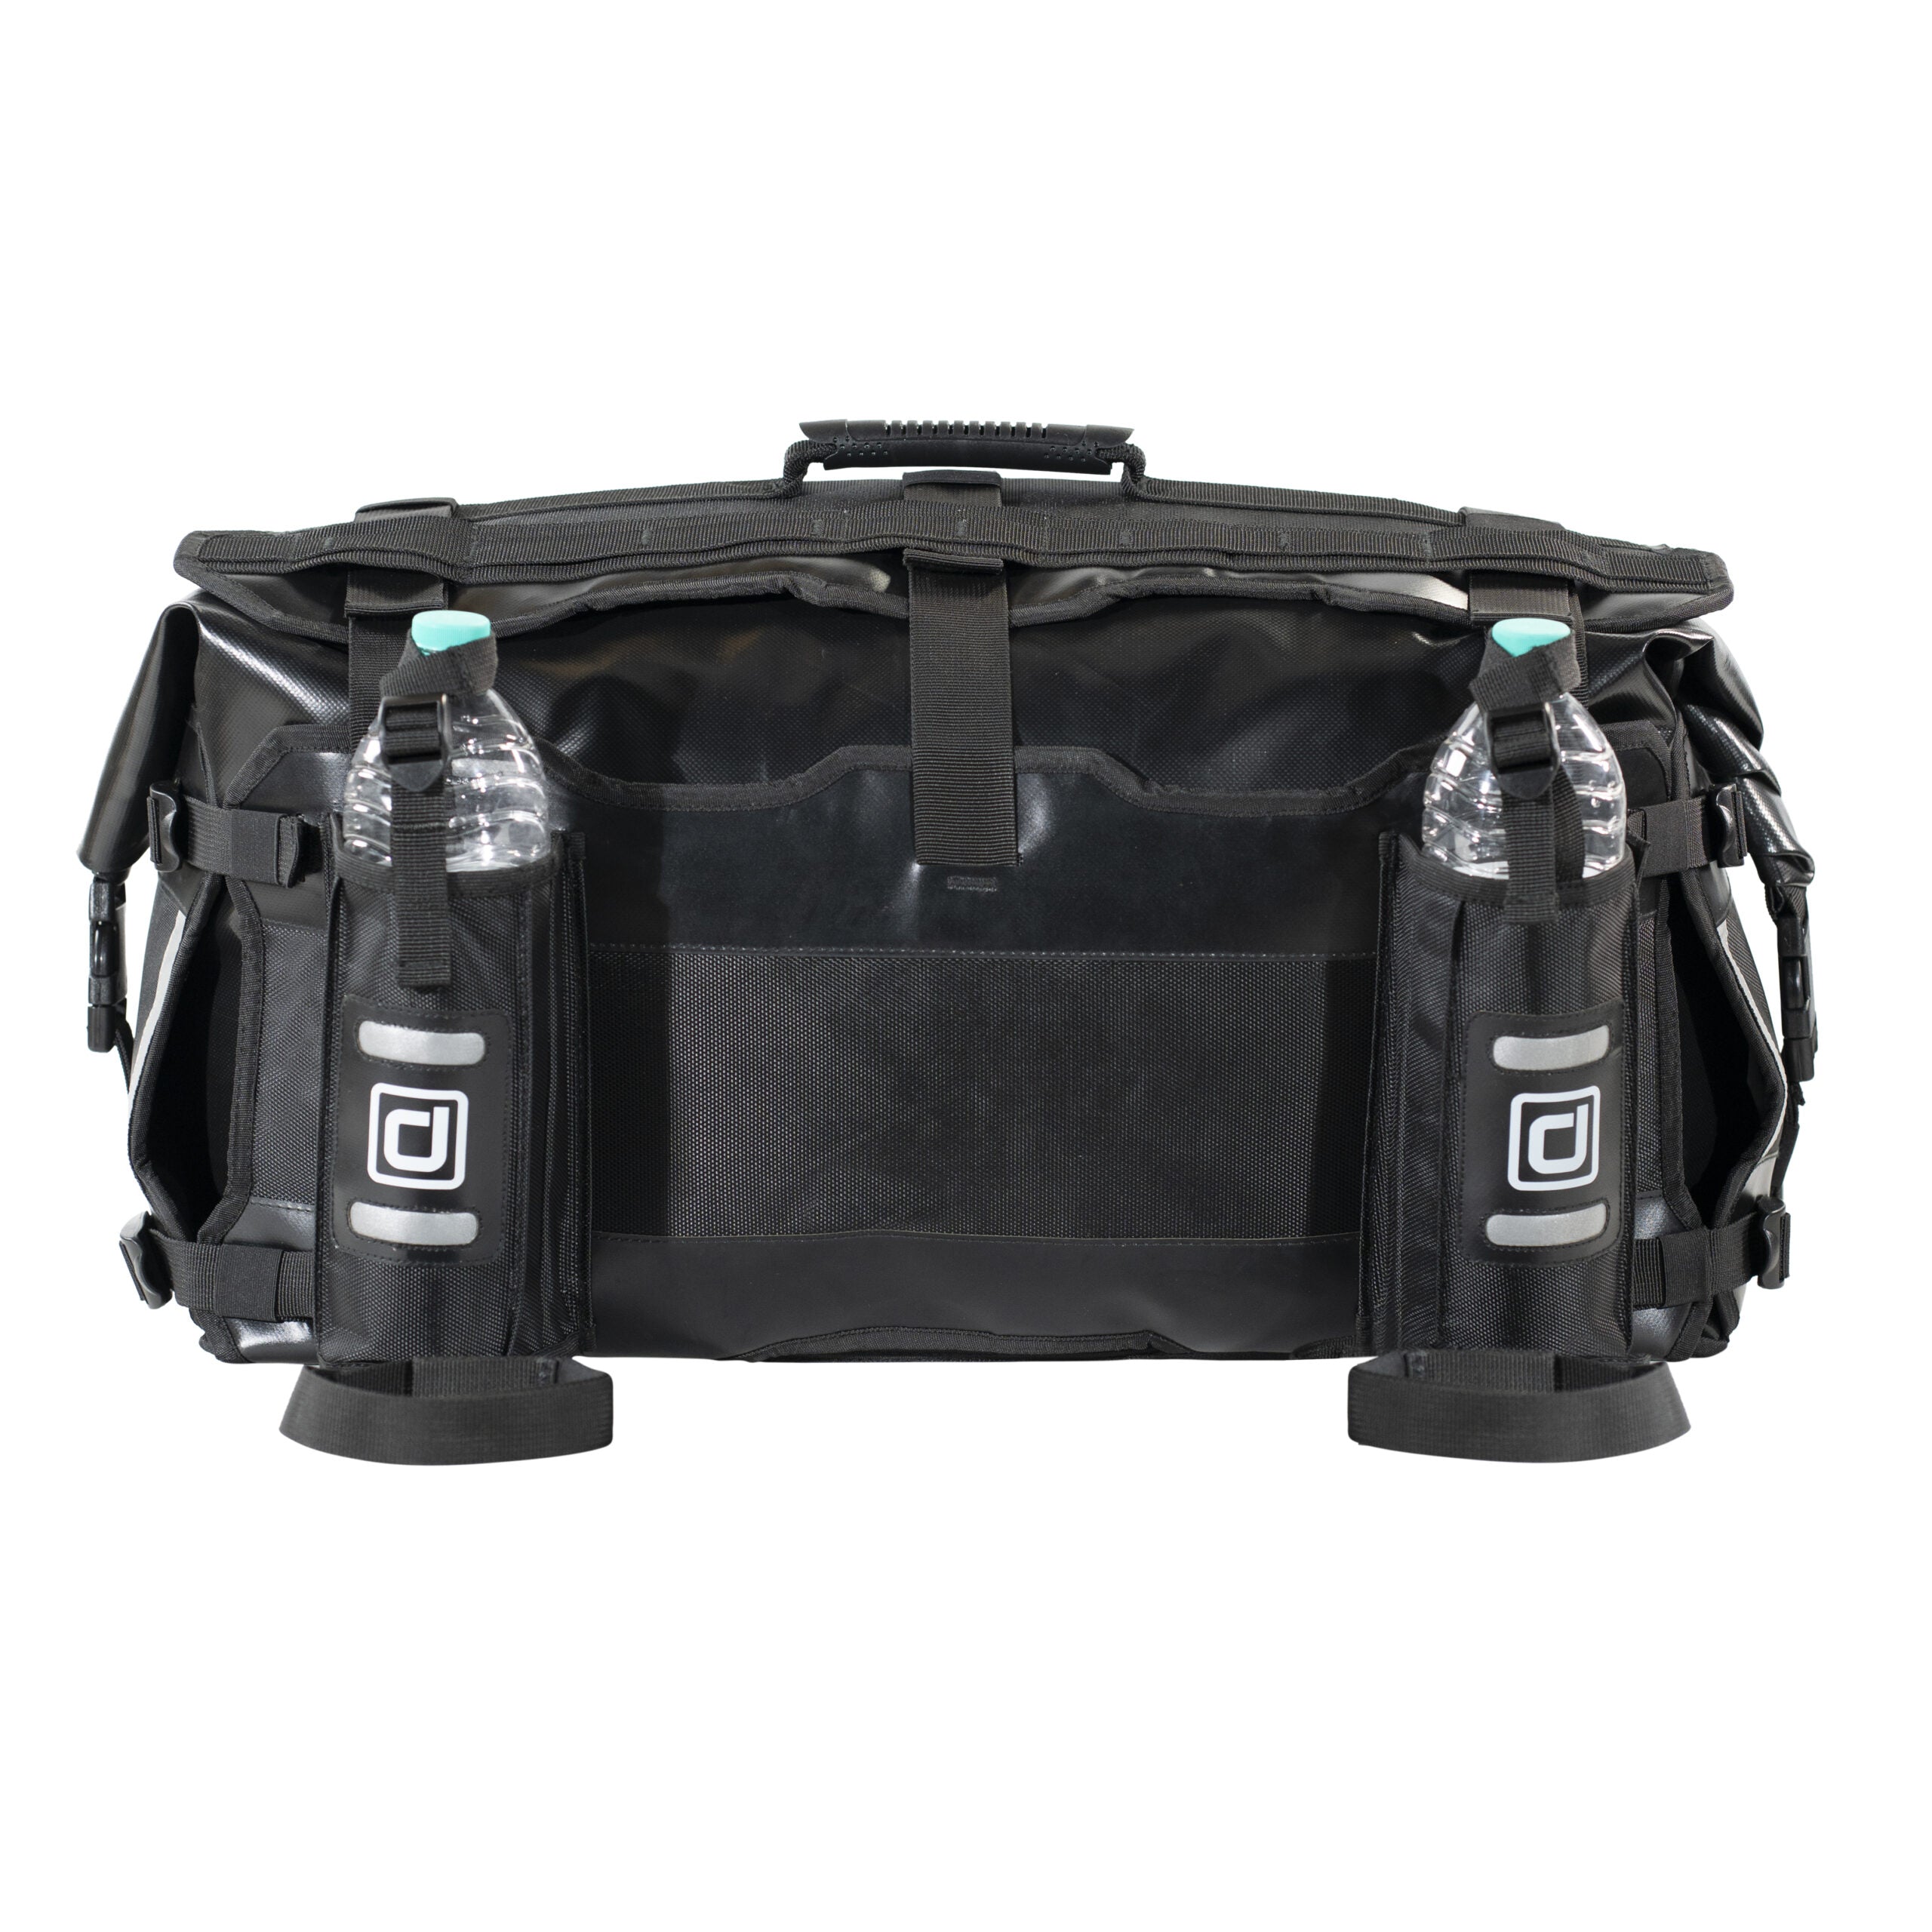 New Dirtsack Frogman Waterproof Tail Bag - Gear and Throttle House Saddle  Bags